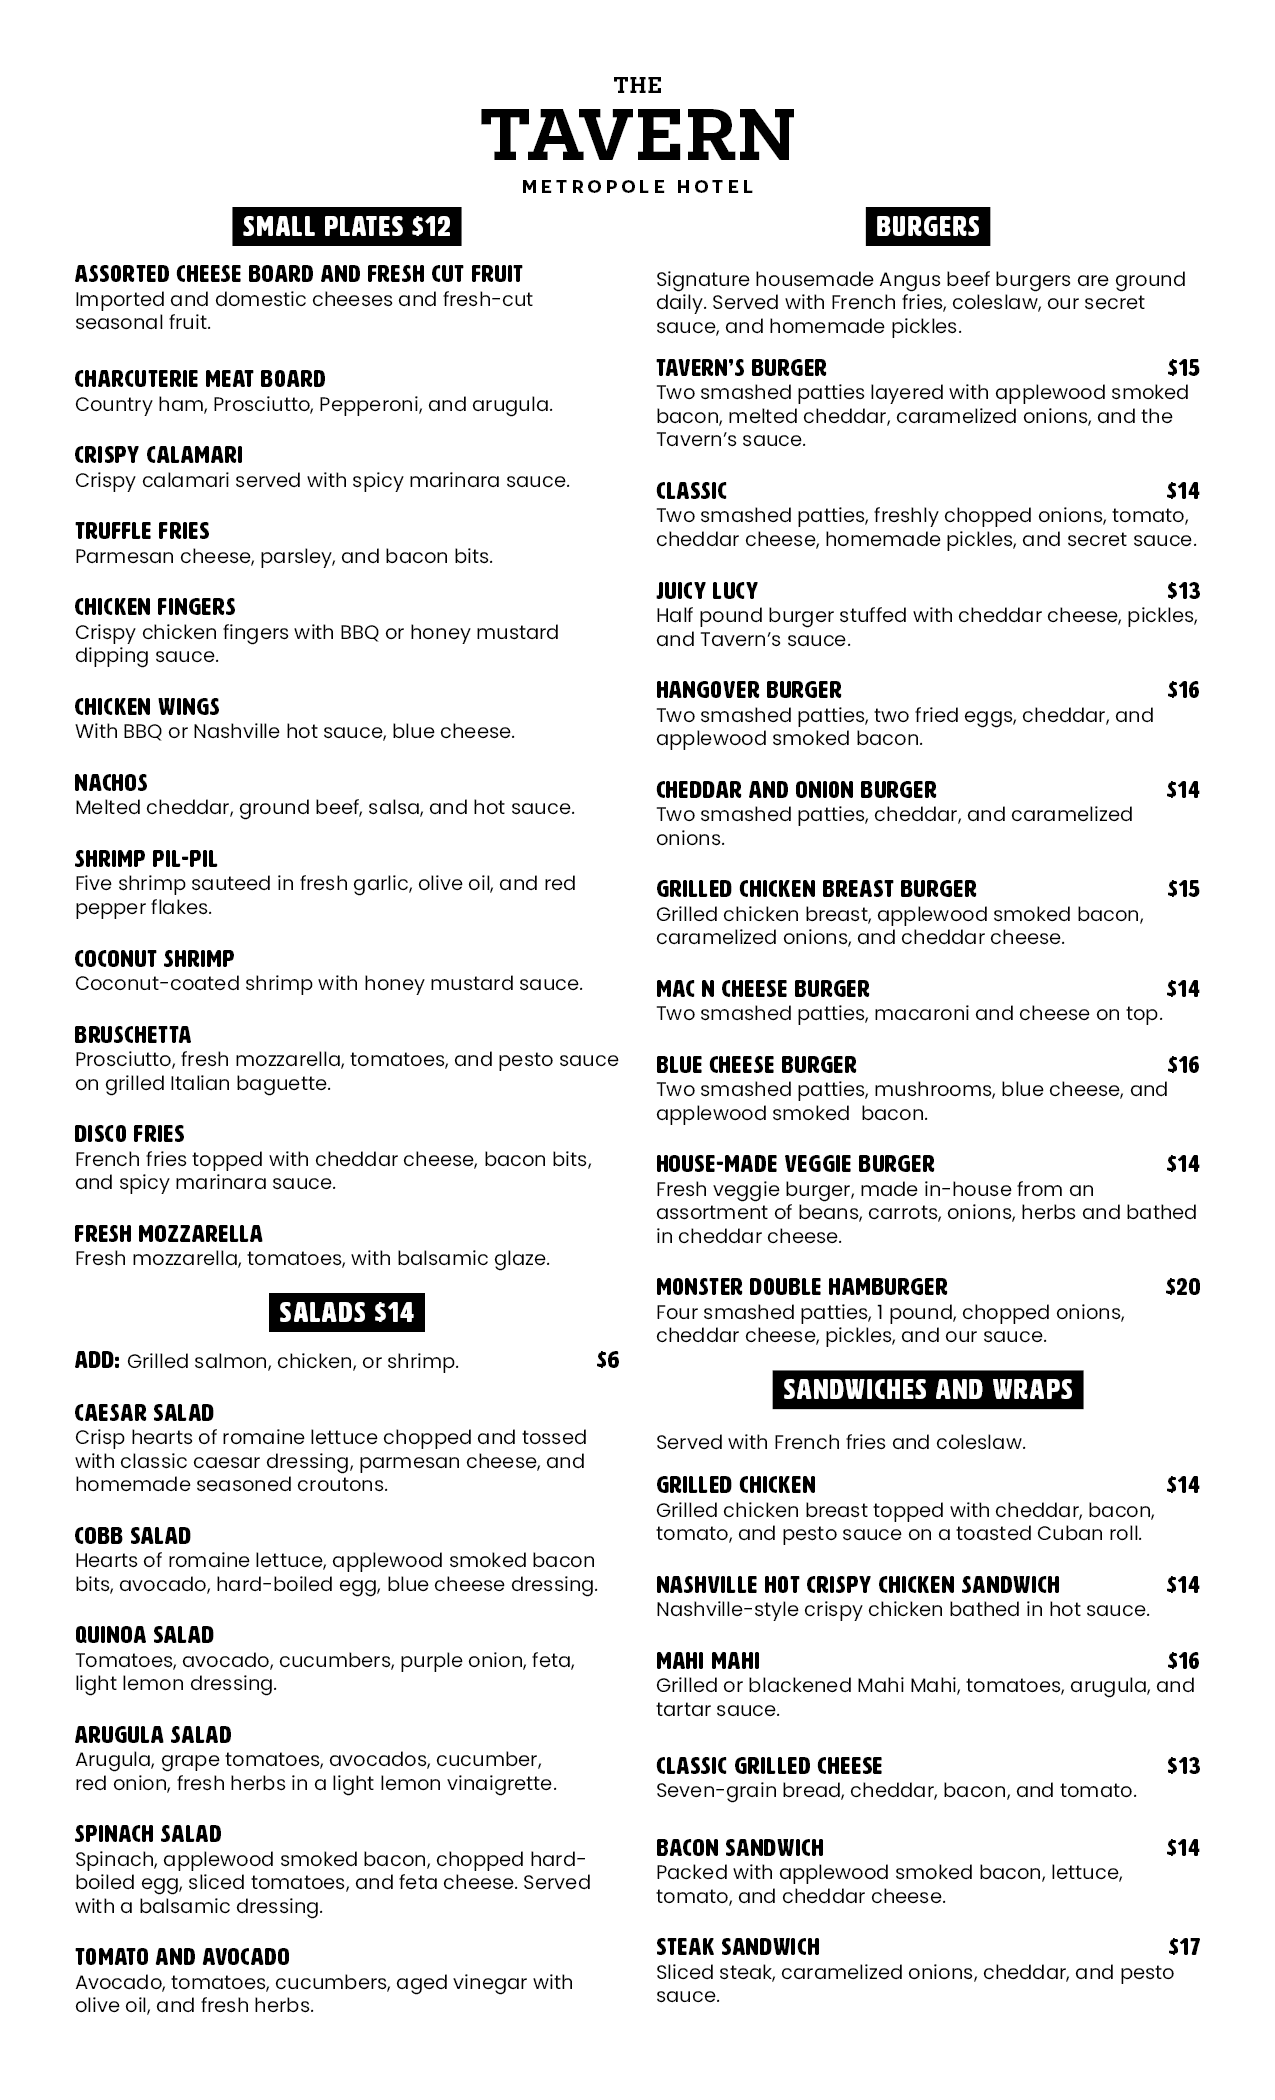 The Tavern menu - page 1 of lunch items 